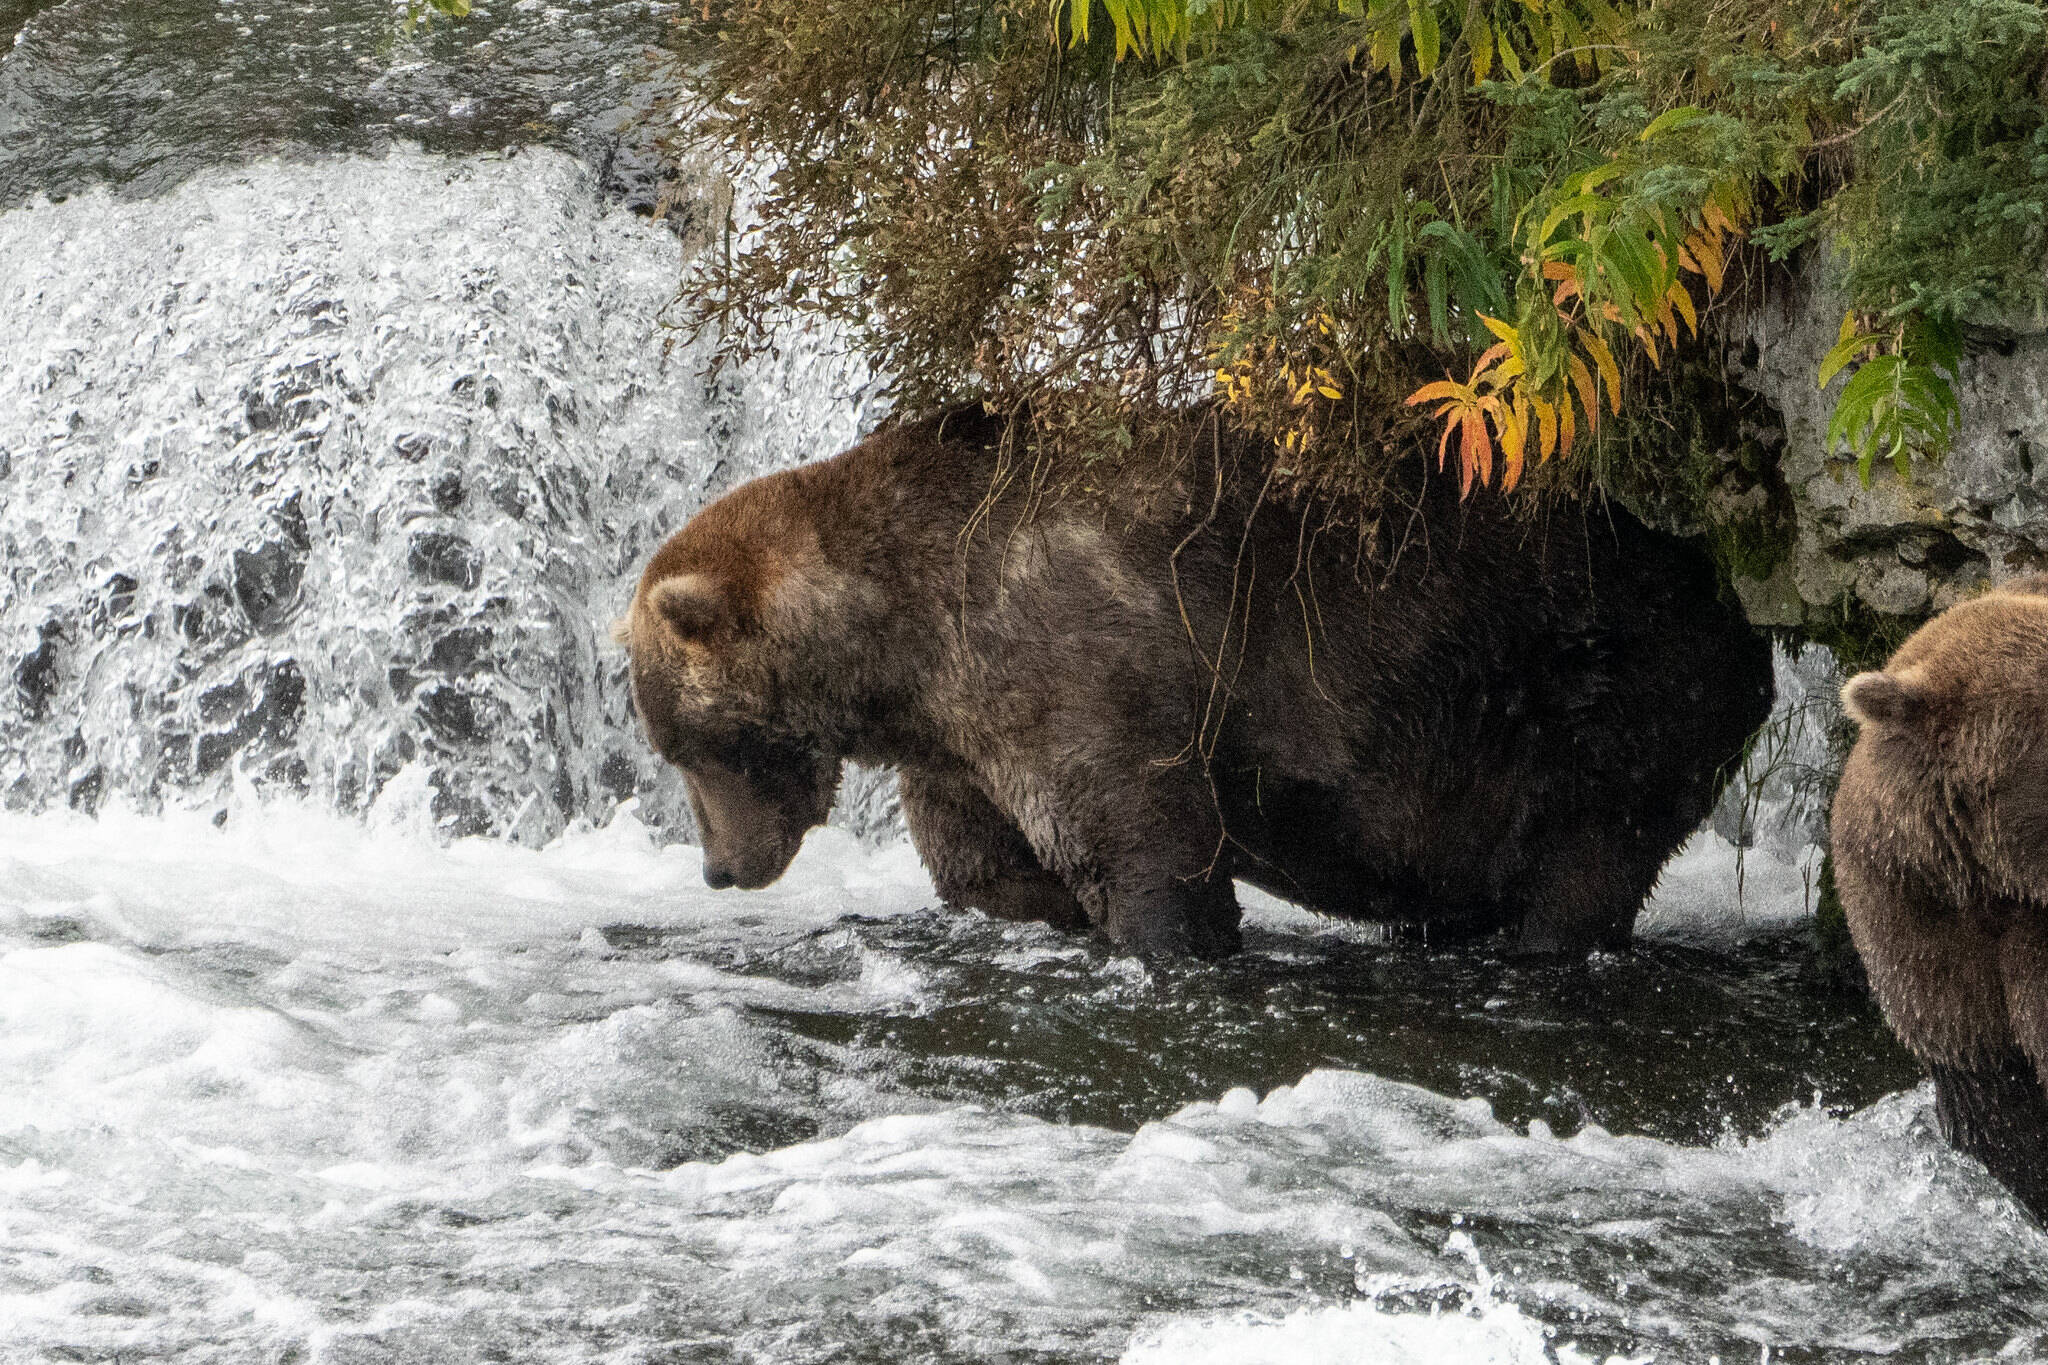 Otis, the four-time Fat Bear Week champion, fishes at Katmai National Park on Sept. 16, 2021. (Photo courtesy of Lian Law, National Parks Service)